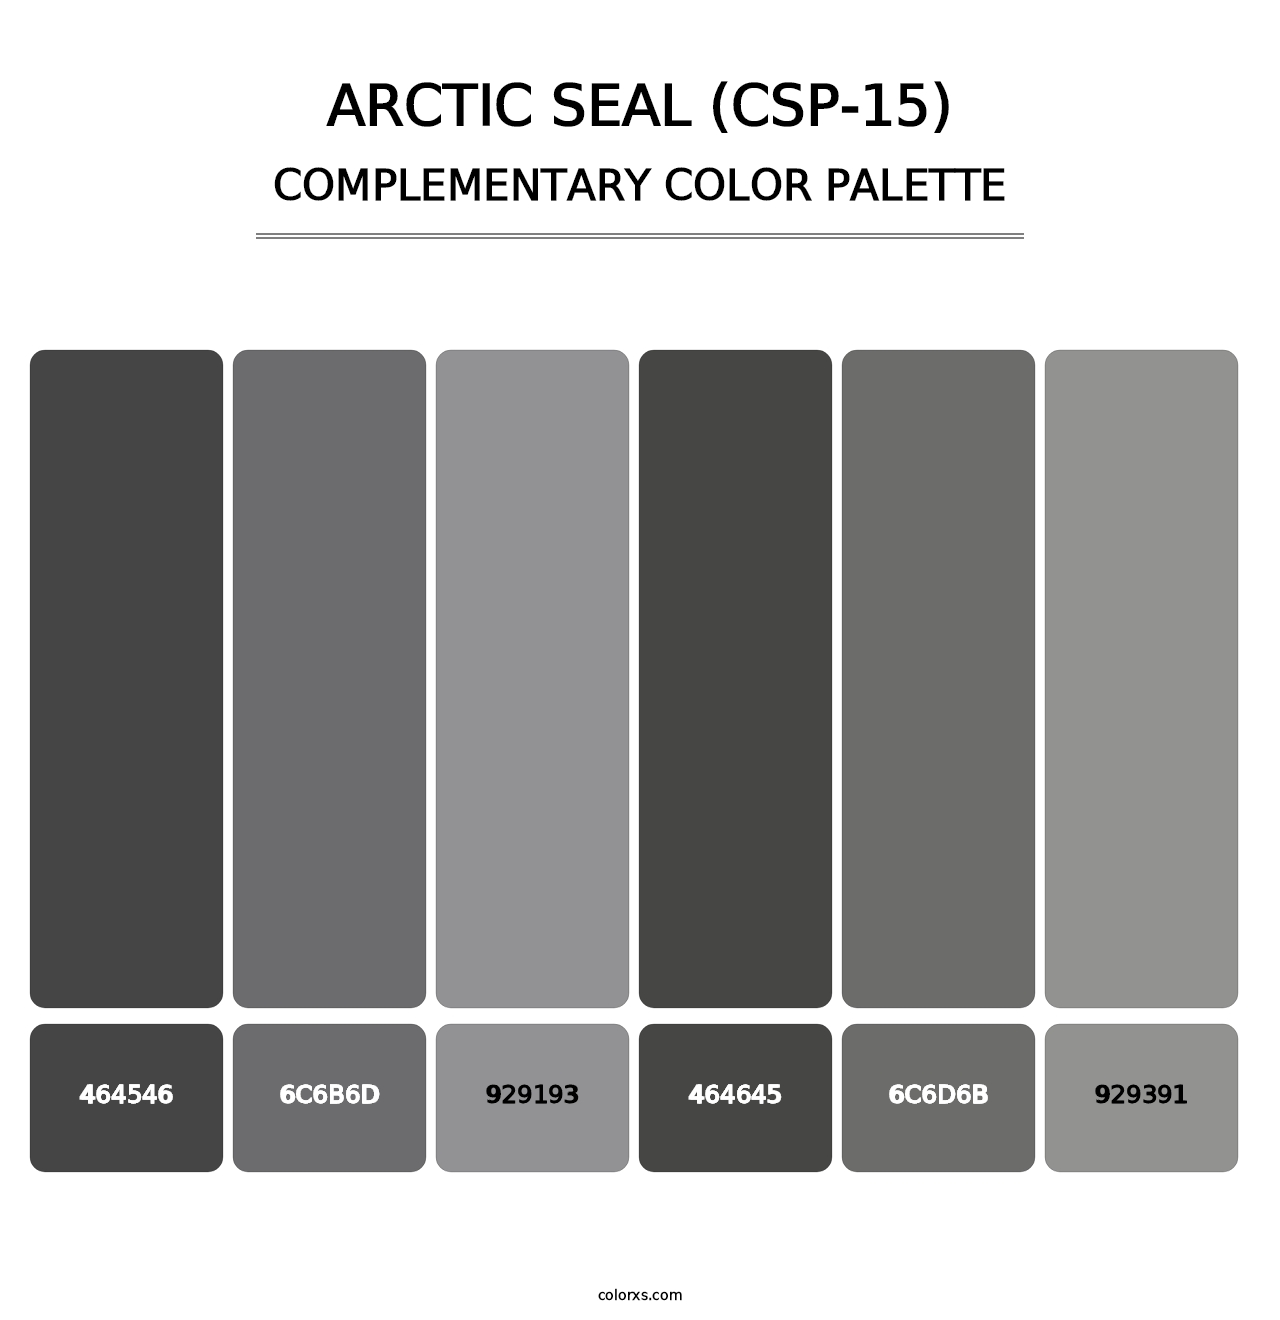 Arctic Seal (CSP-15) - Complementary Color Palette